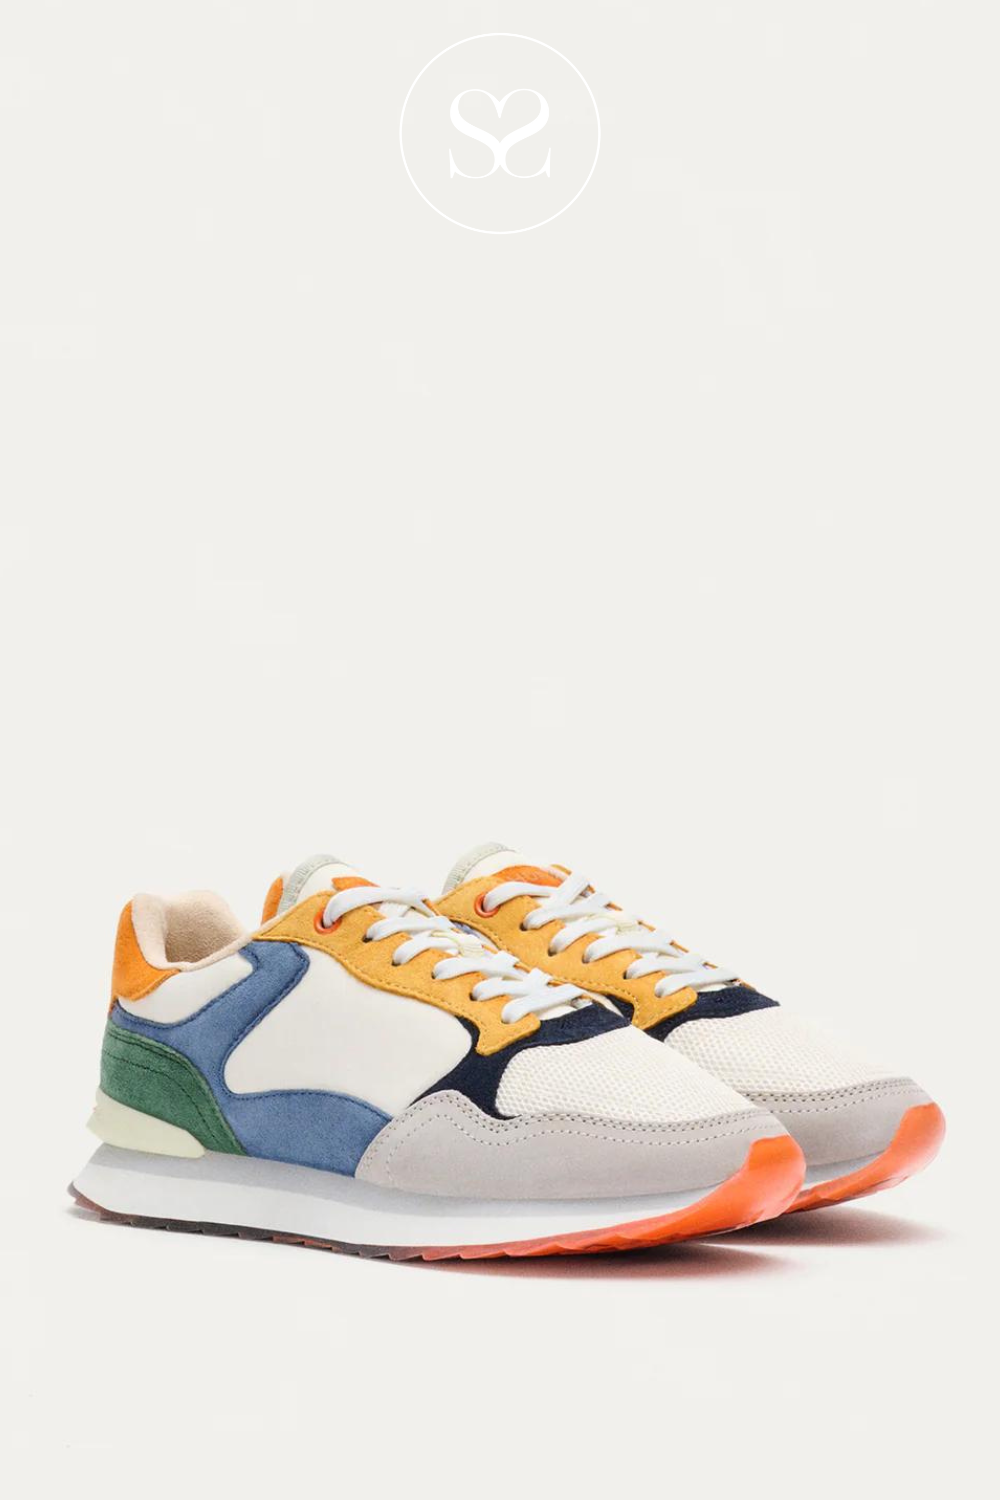 HOFF BANGKOK COLOURFUL TRAINERS WITH WHITE LACES, HOFF LOGO ON THE HEEL AND A CUSHIONED INSOLE